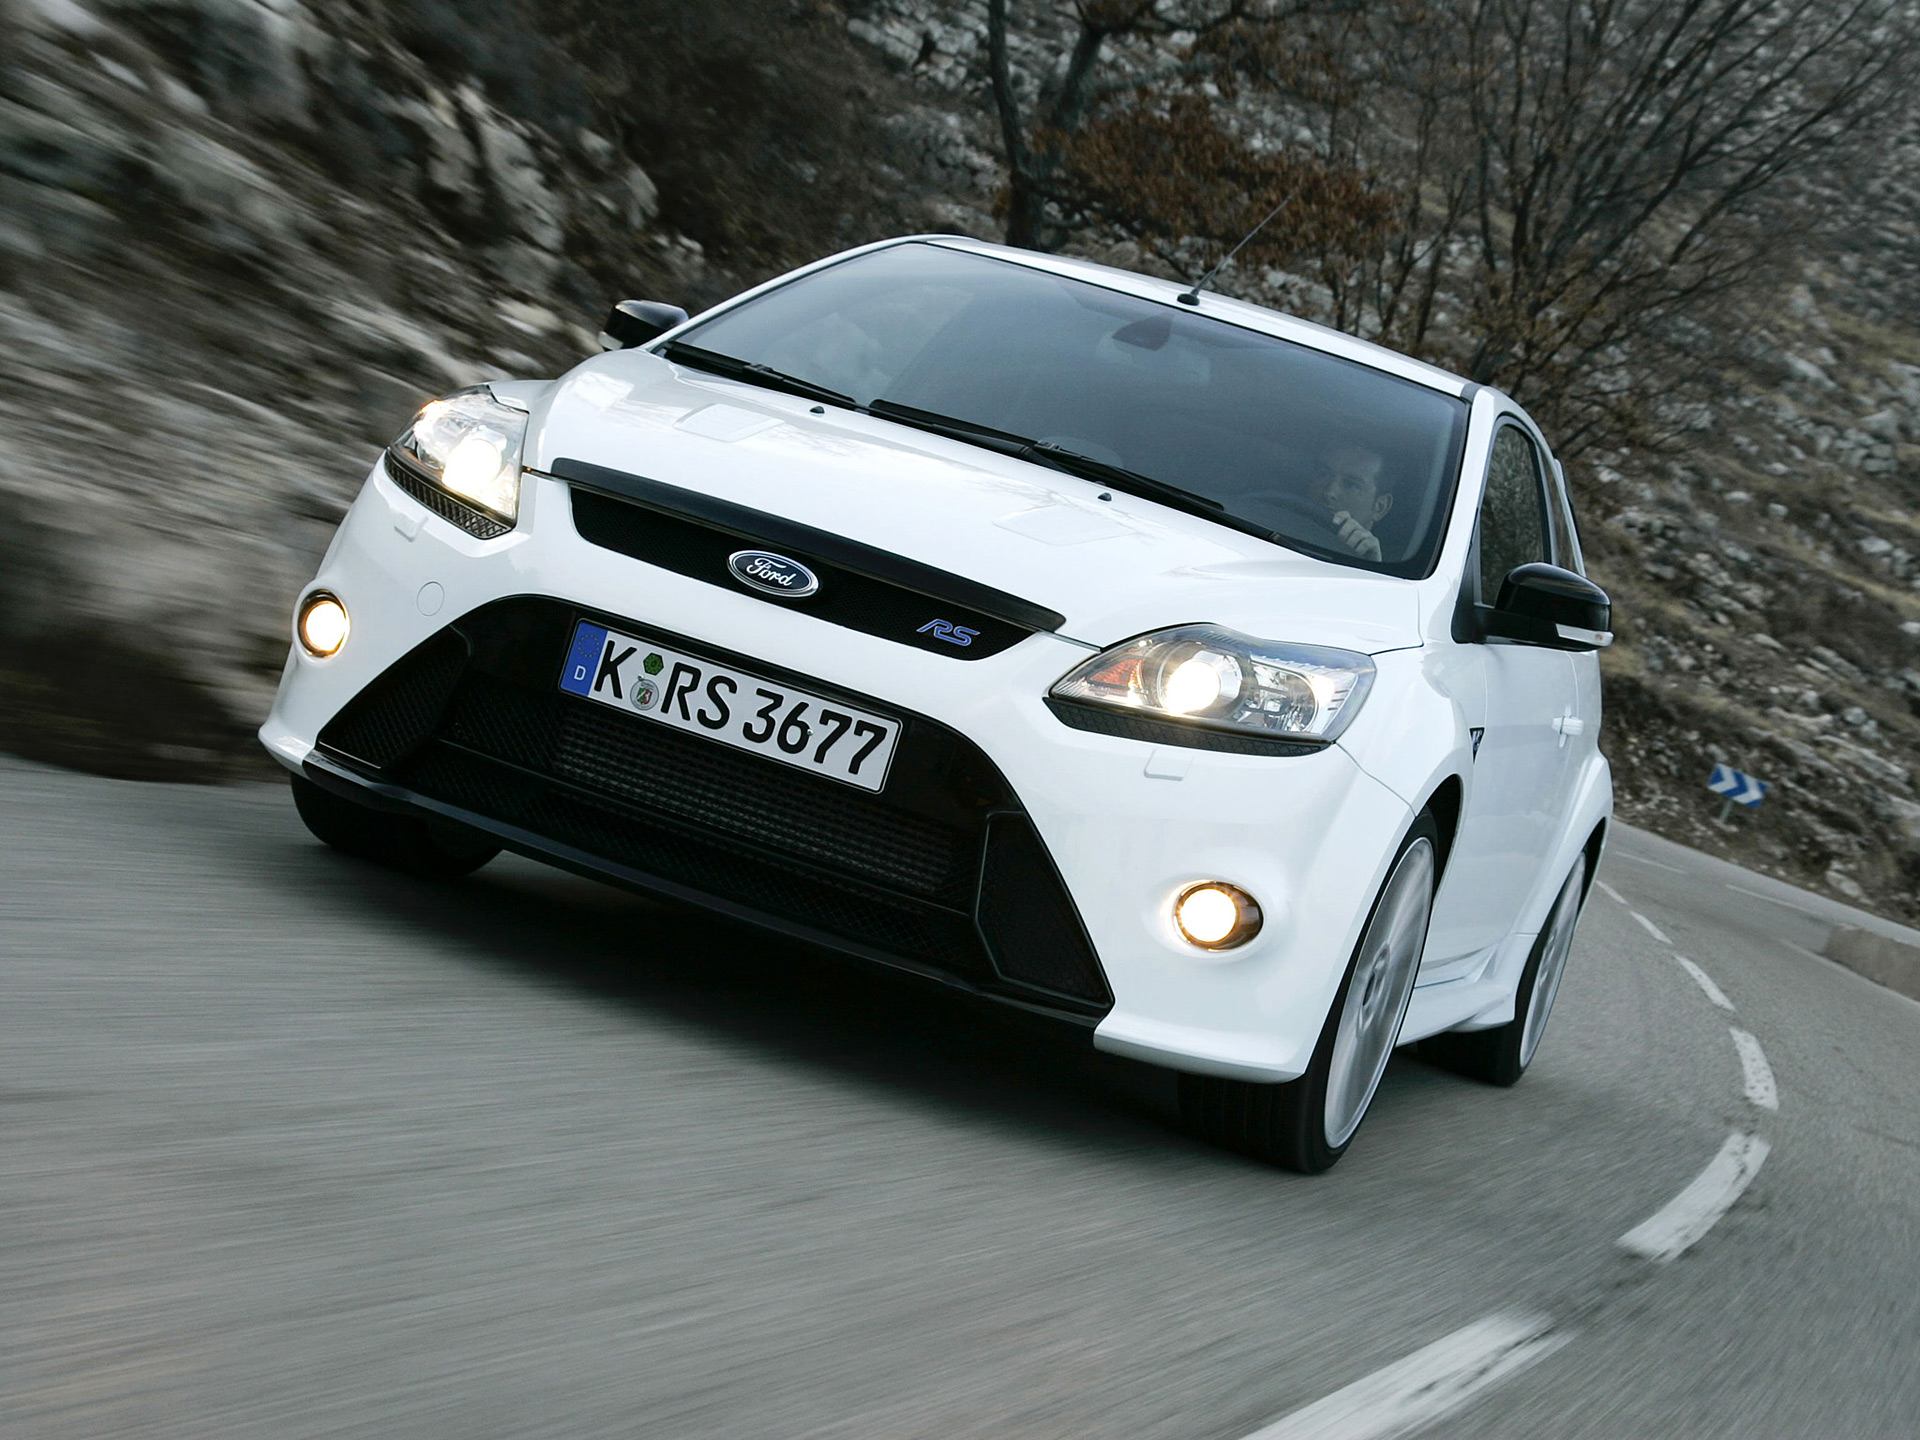  2009 Ford Focus RS Wallpaper.